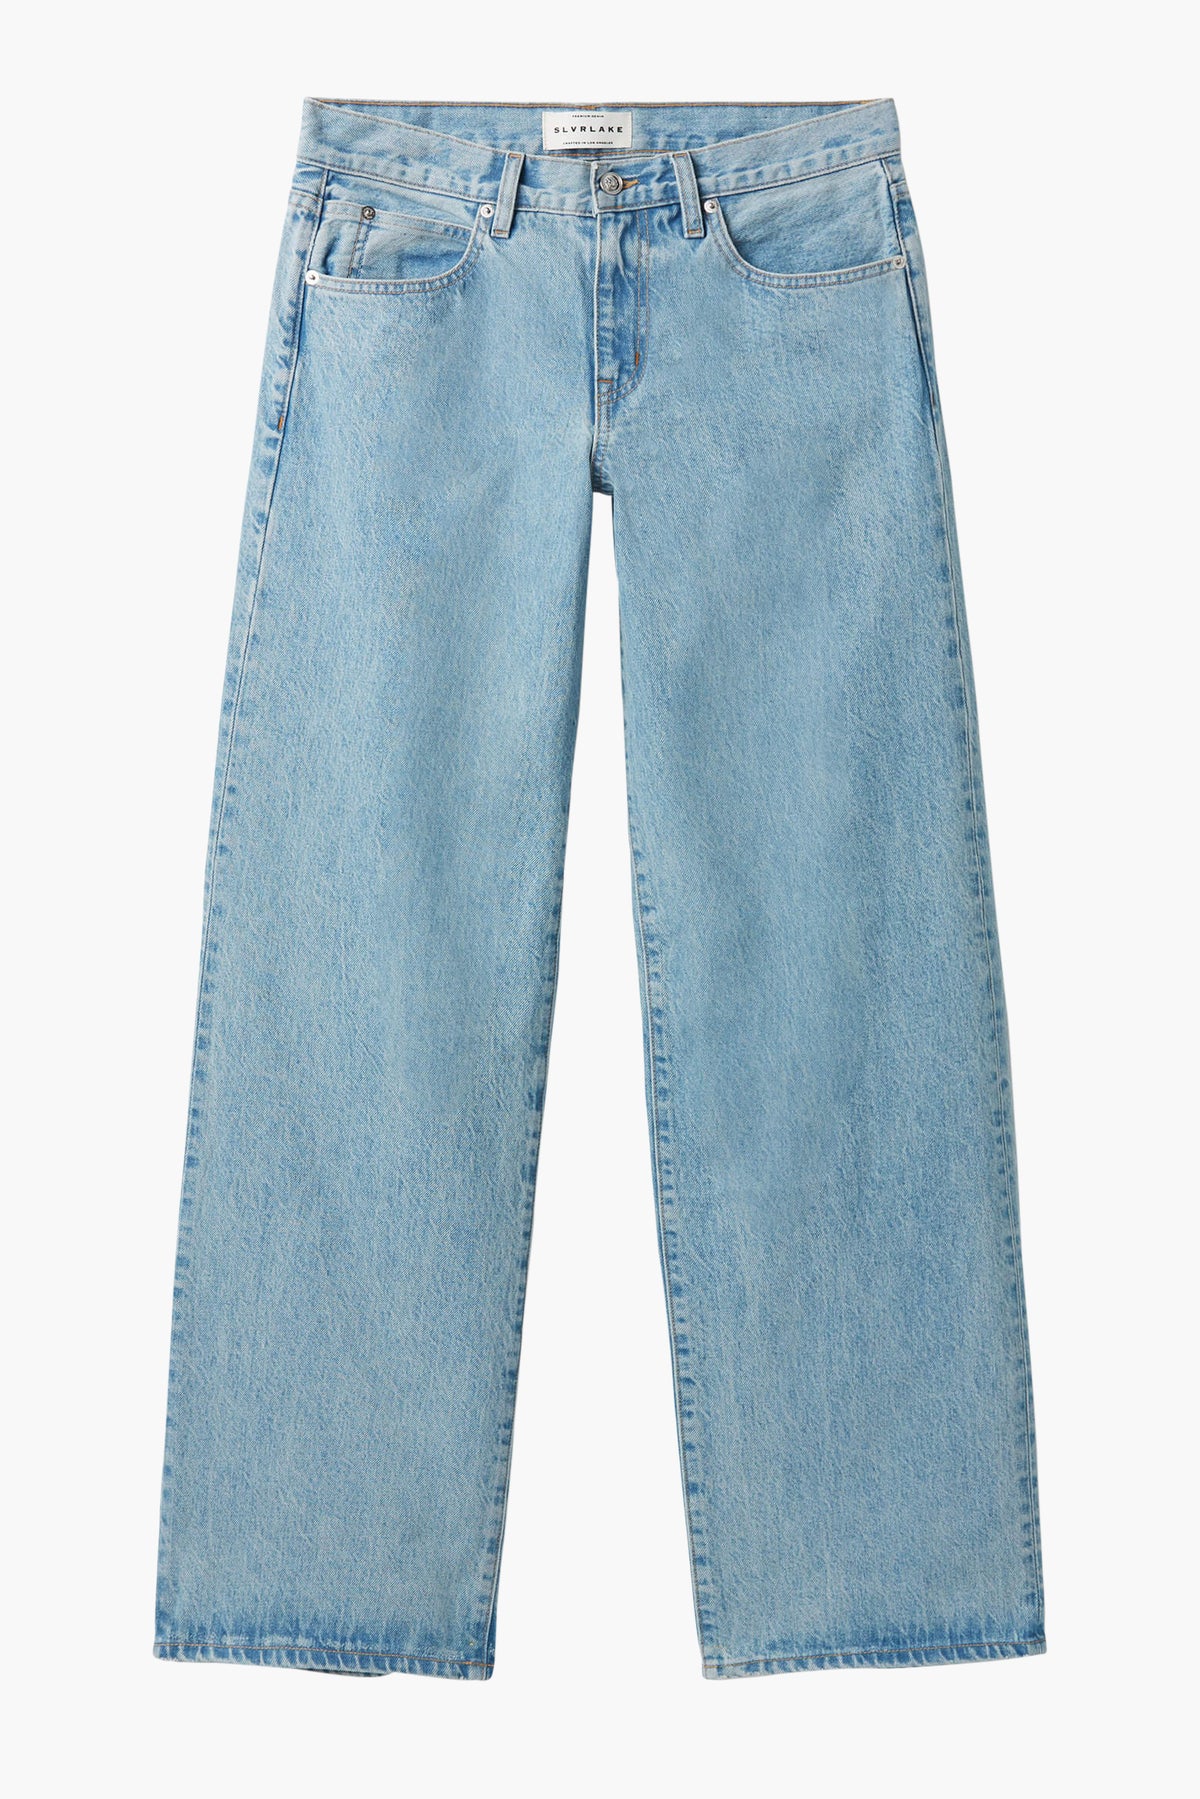 Slvrlake | Mica Relaxed Wide Leg Jean in Clear Skies | The New Trend